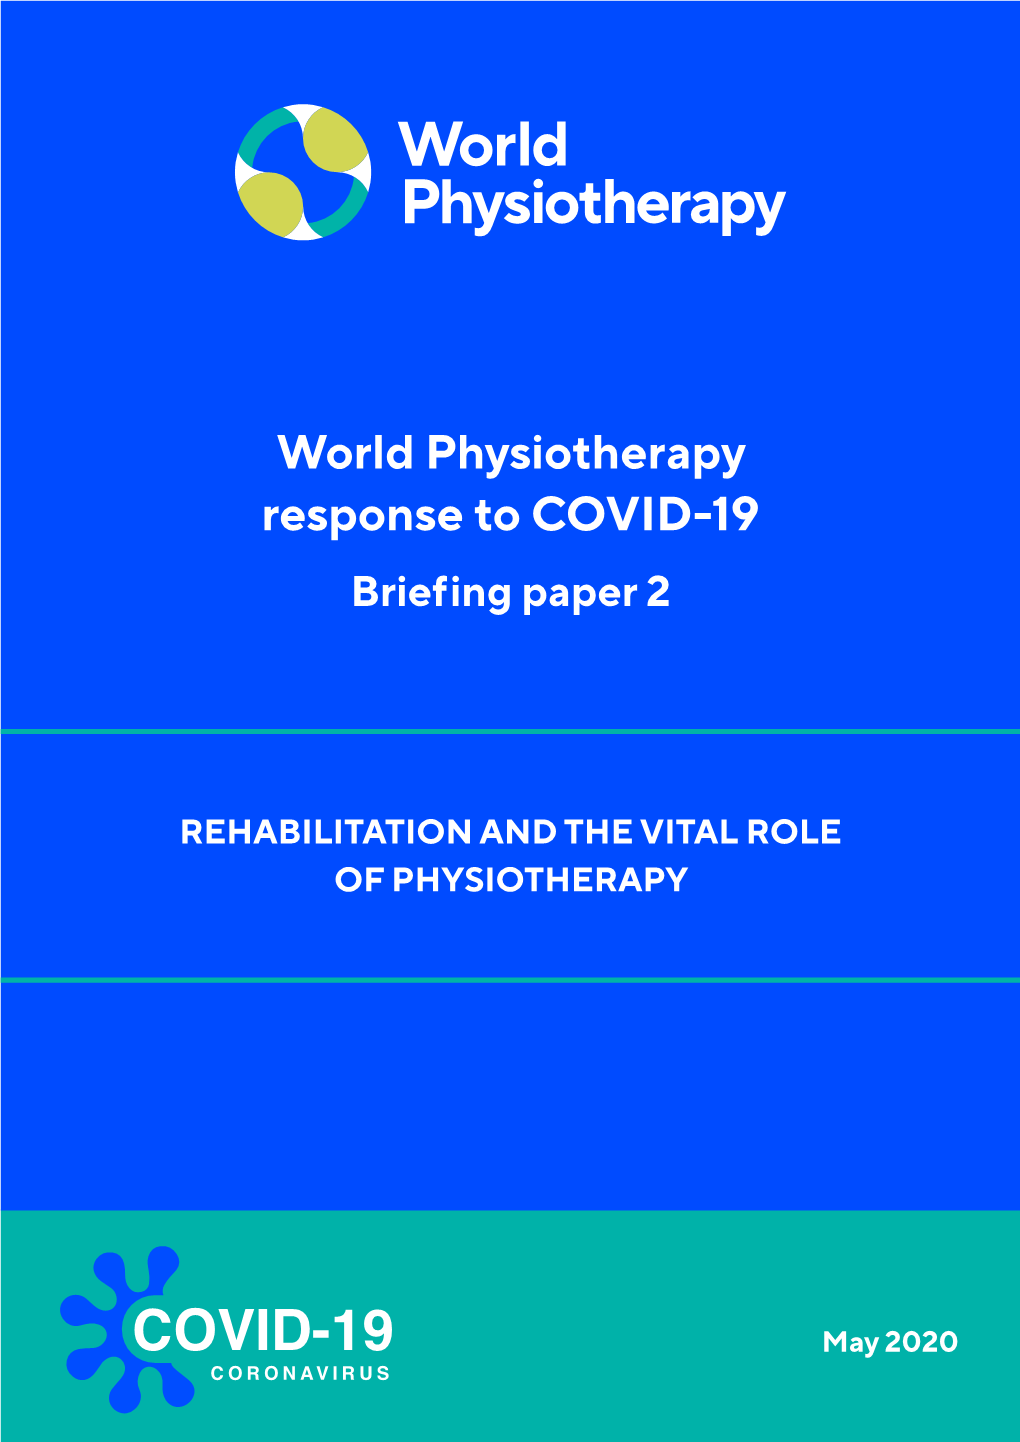 World Physiotherapy Response to COVID-19 Briefing Paper 2